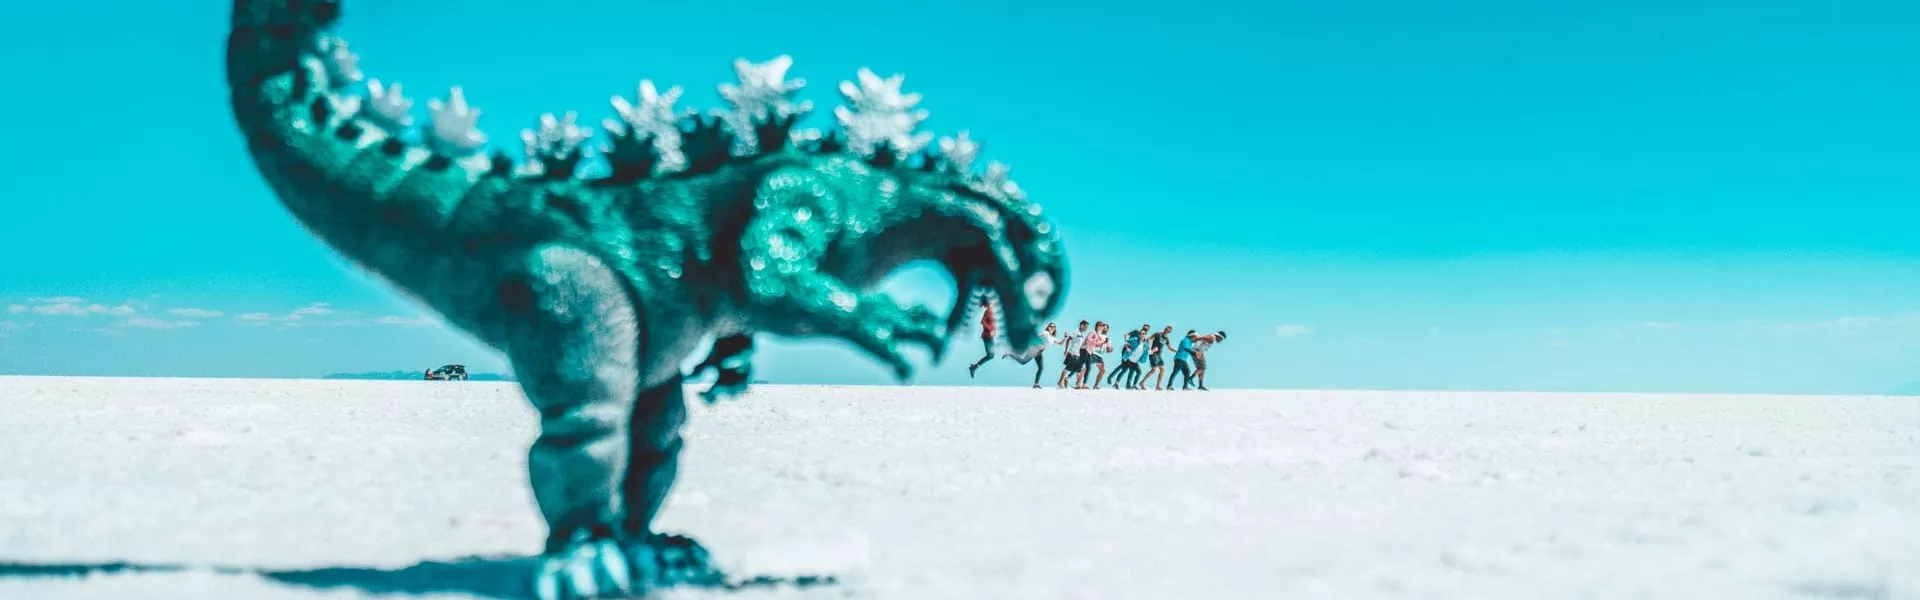 A group of people pretending to escape from a dinosaur